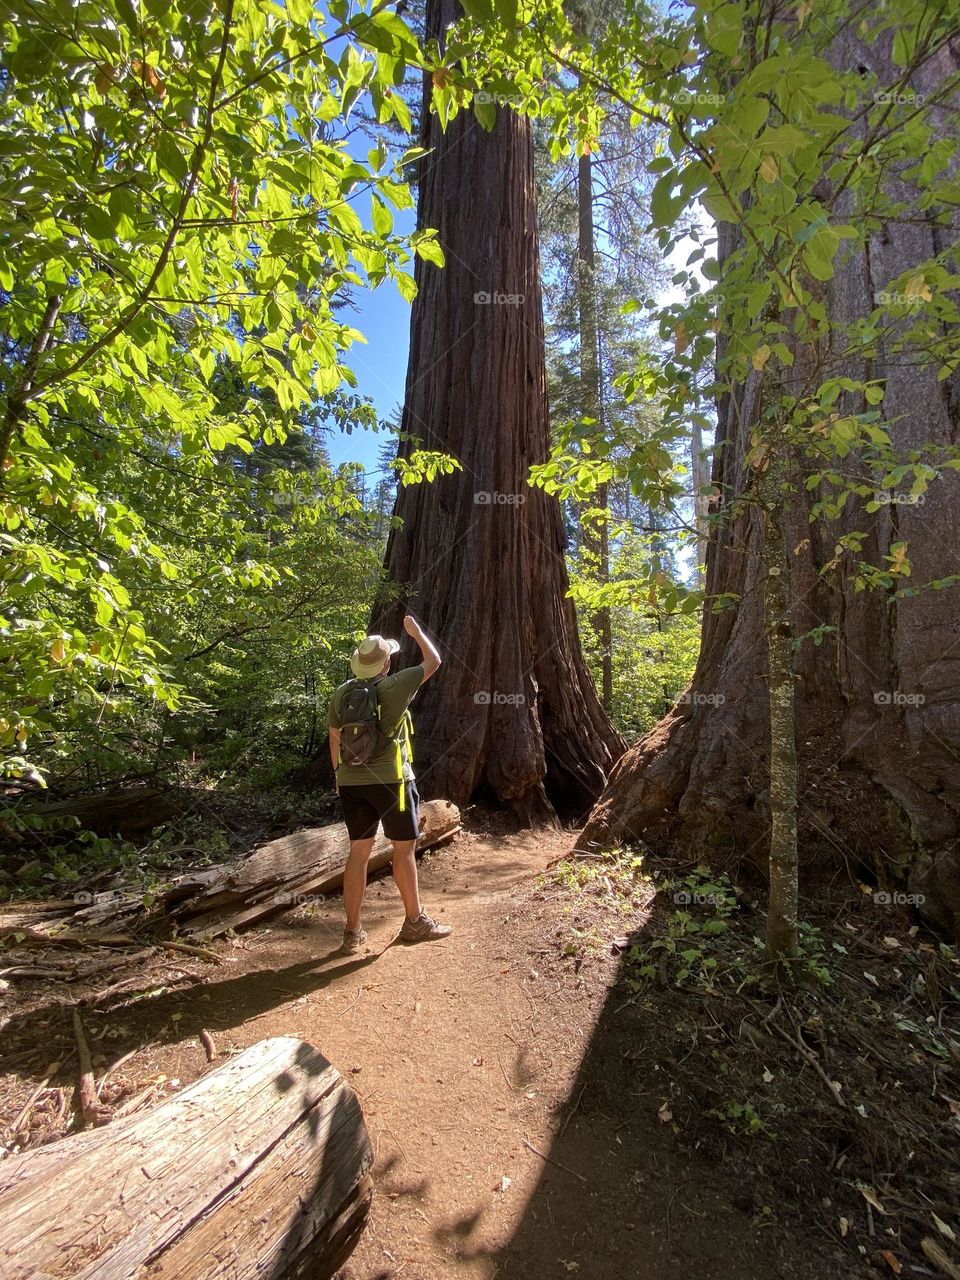 A man from behind looking up to admire the massive sequoia trees 